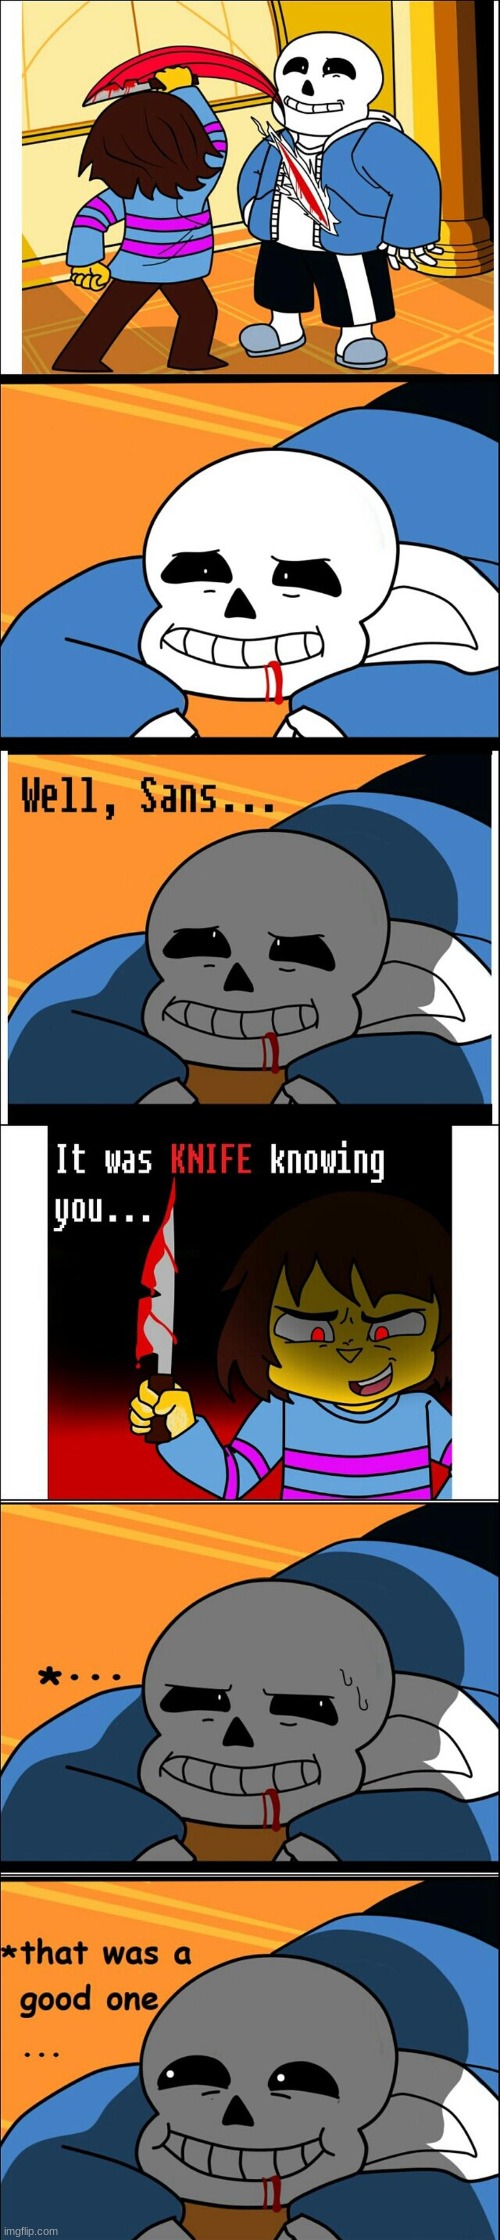 Puns | image tagged in funny memes,funny,undertale,memes | made w/ Imgflip meme maker